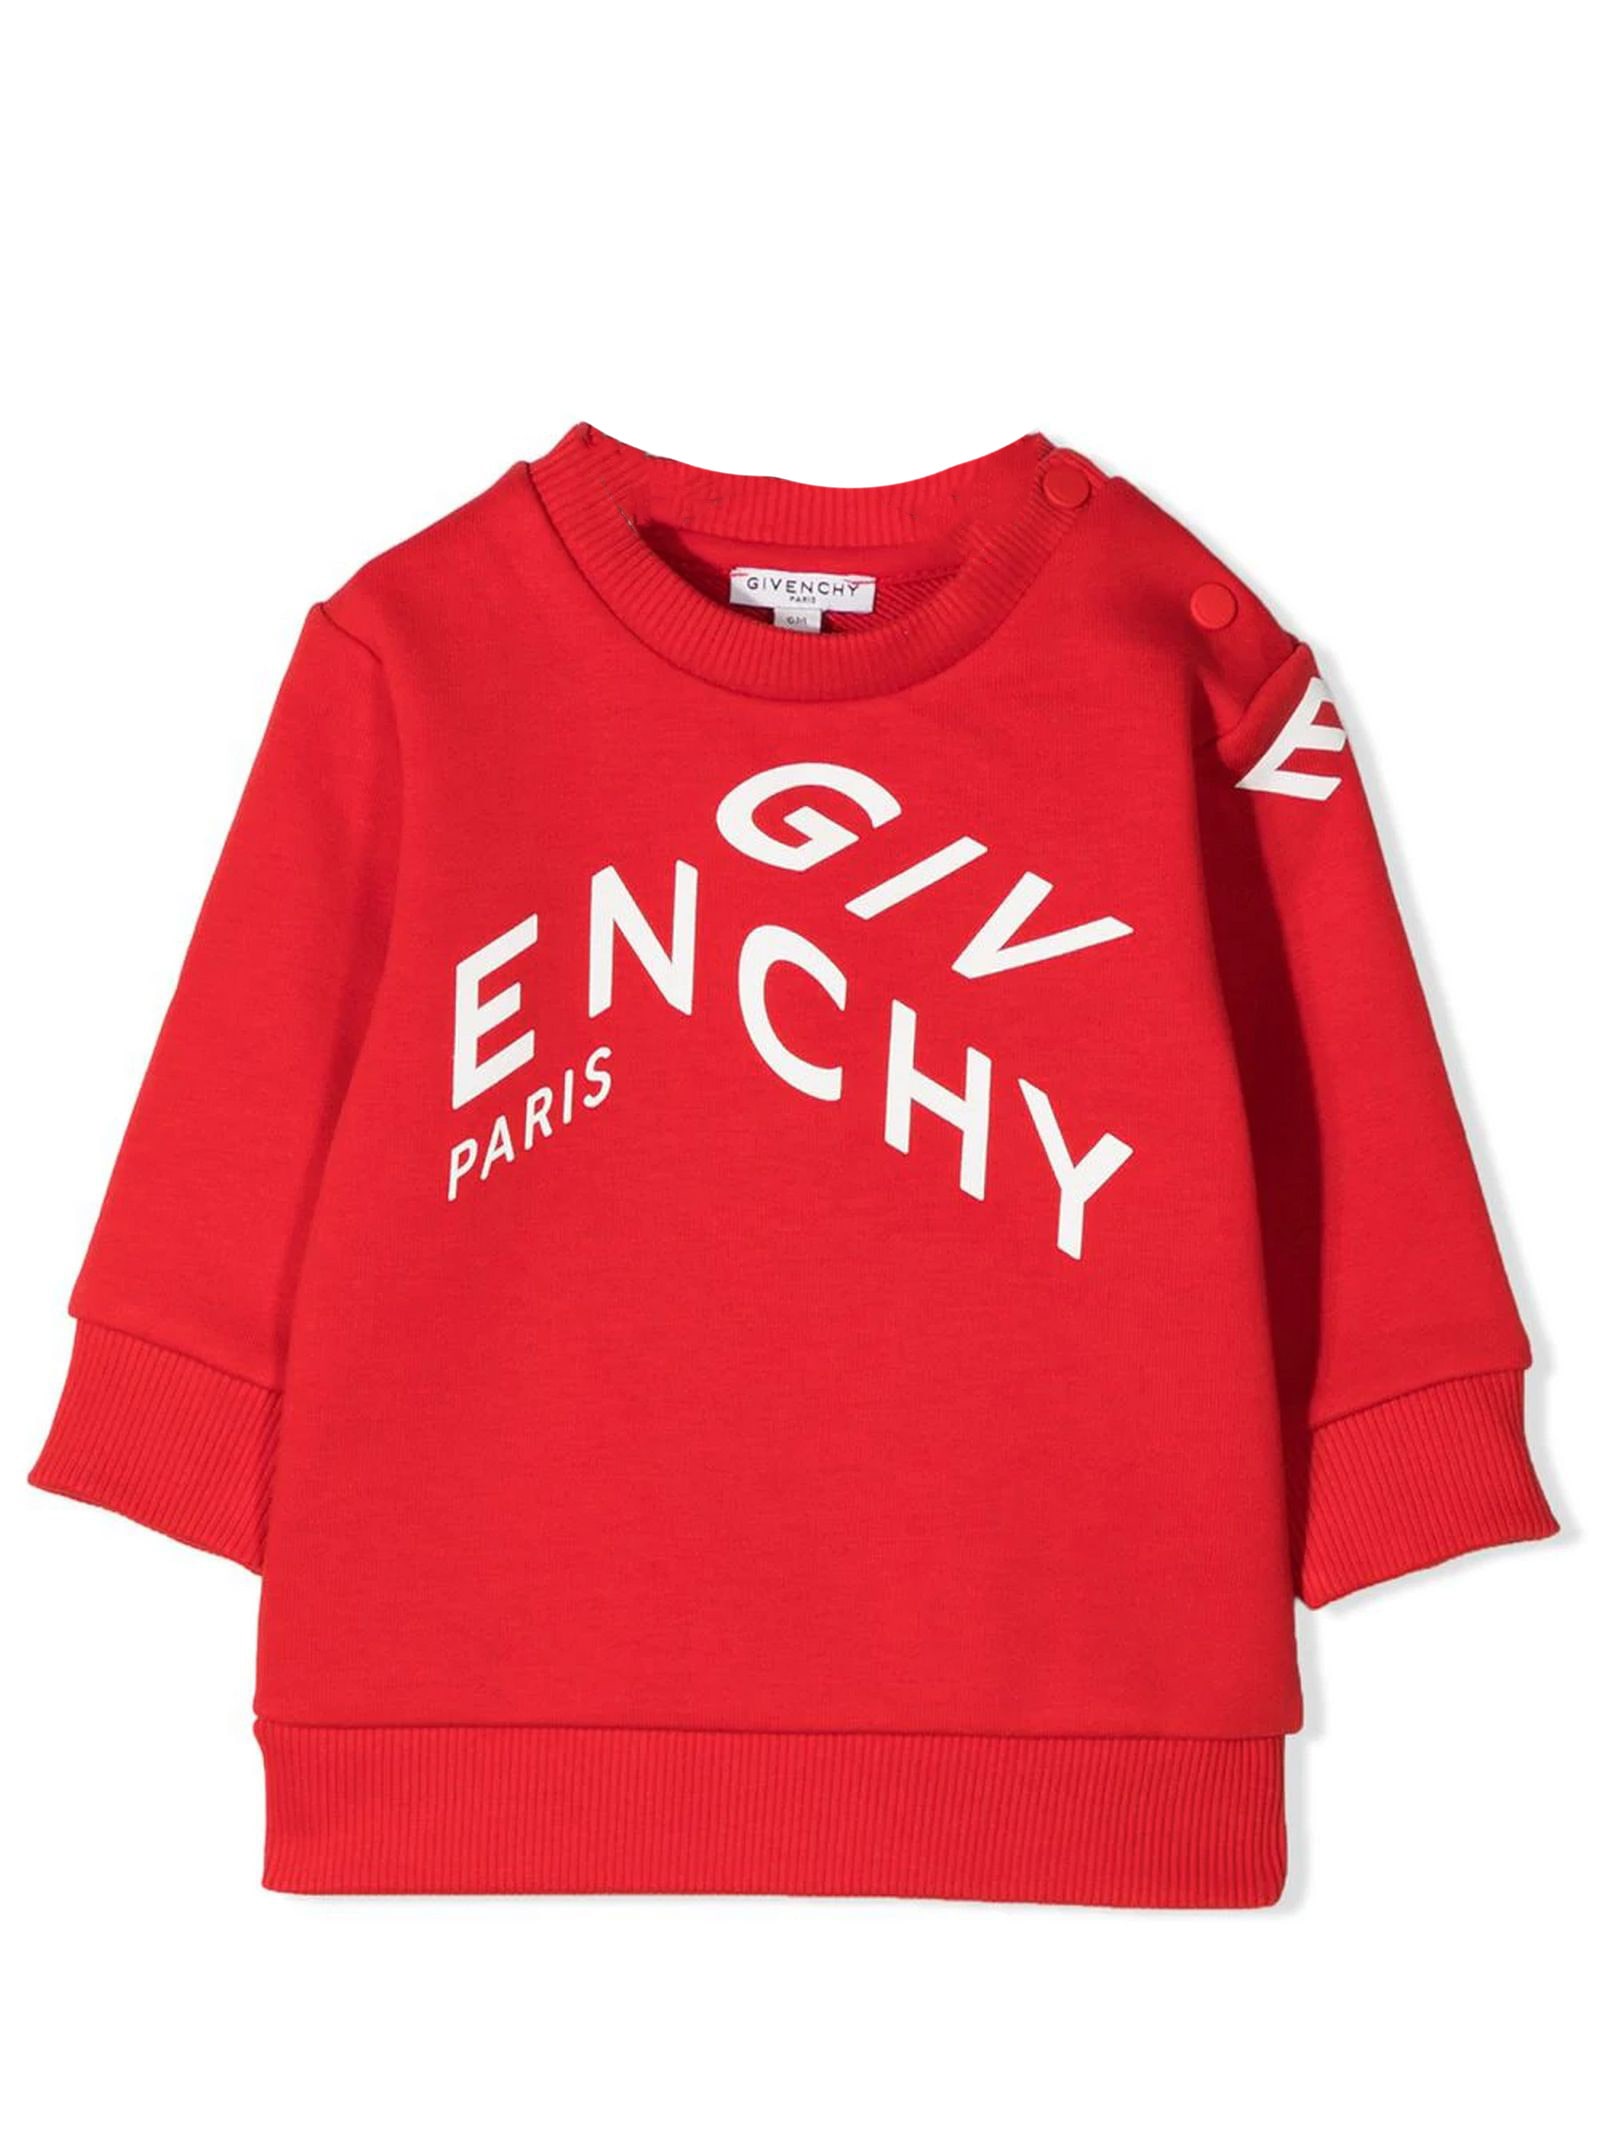 Givenchy Red Cotton Sweatshirt